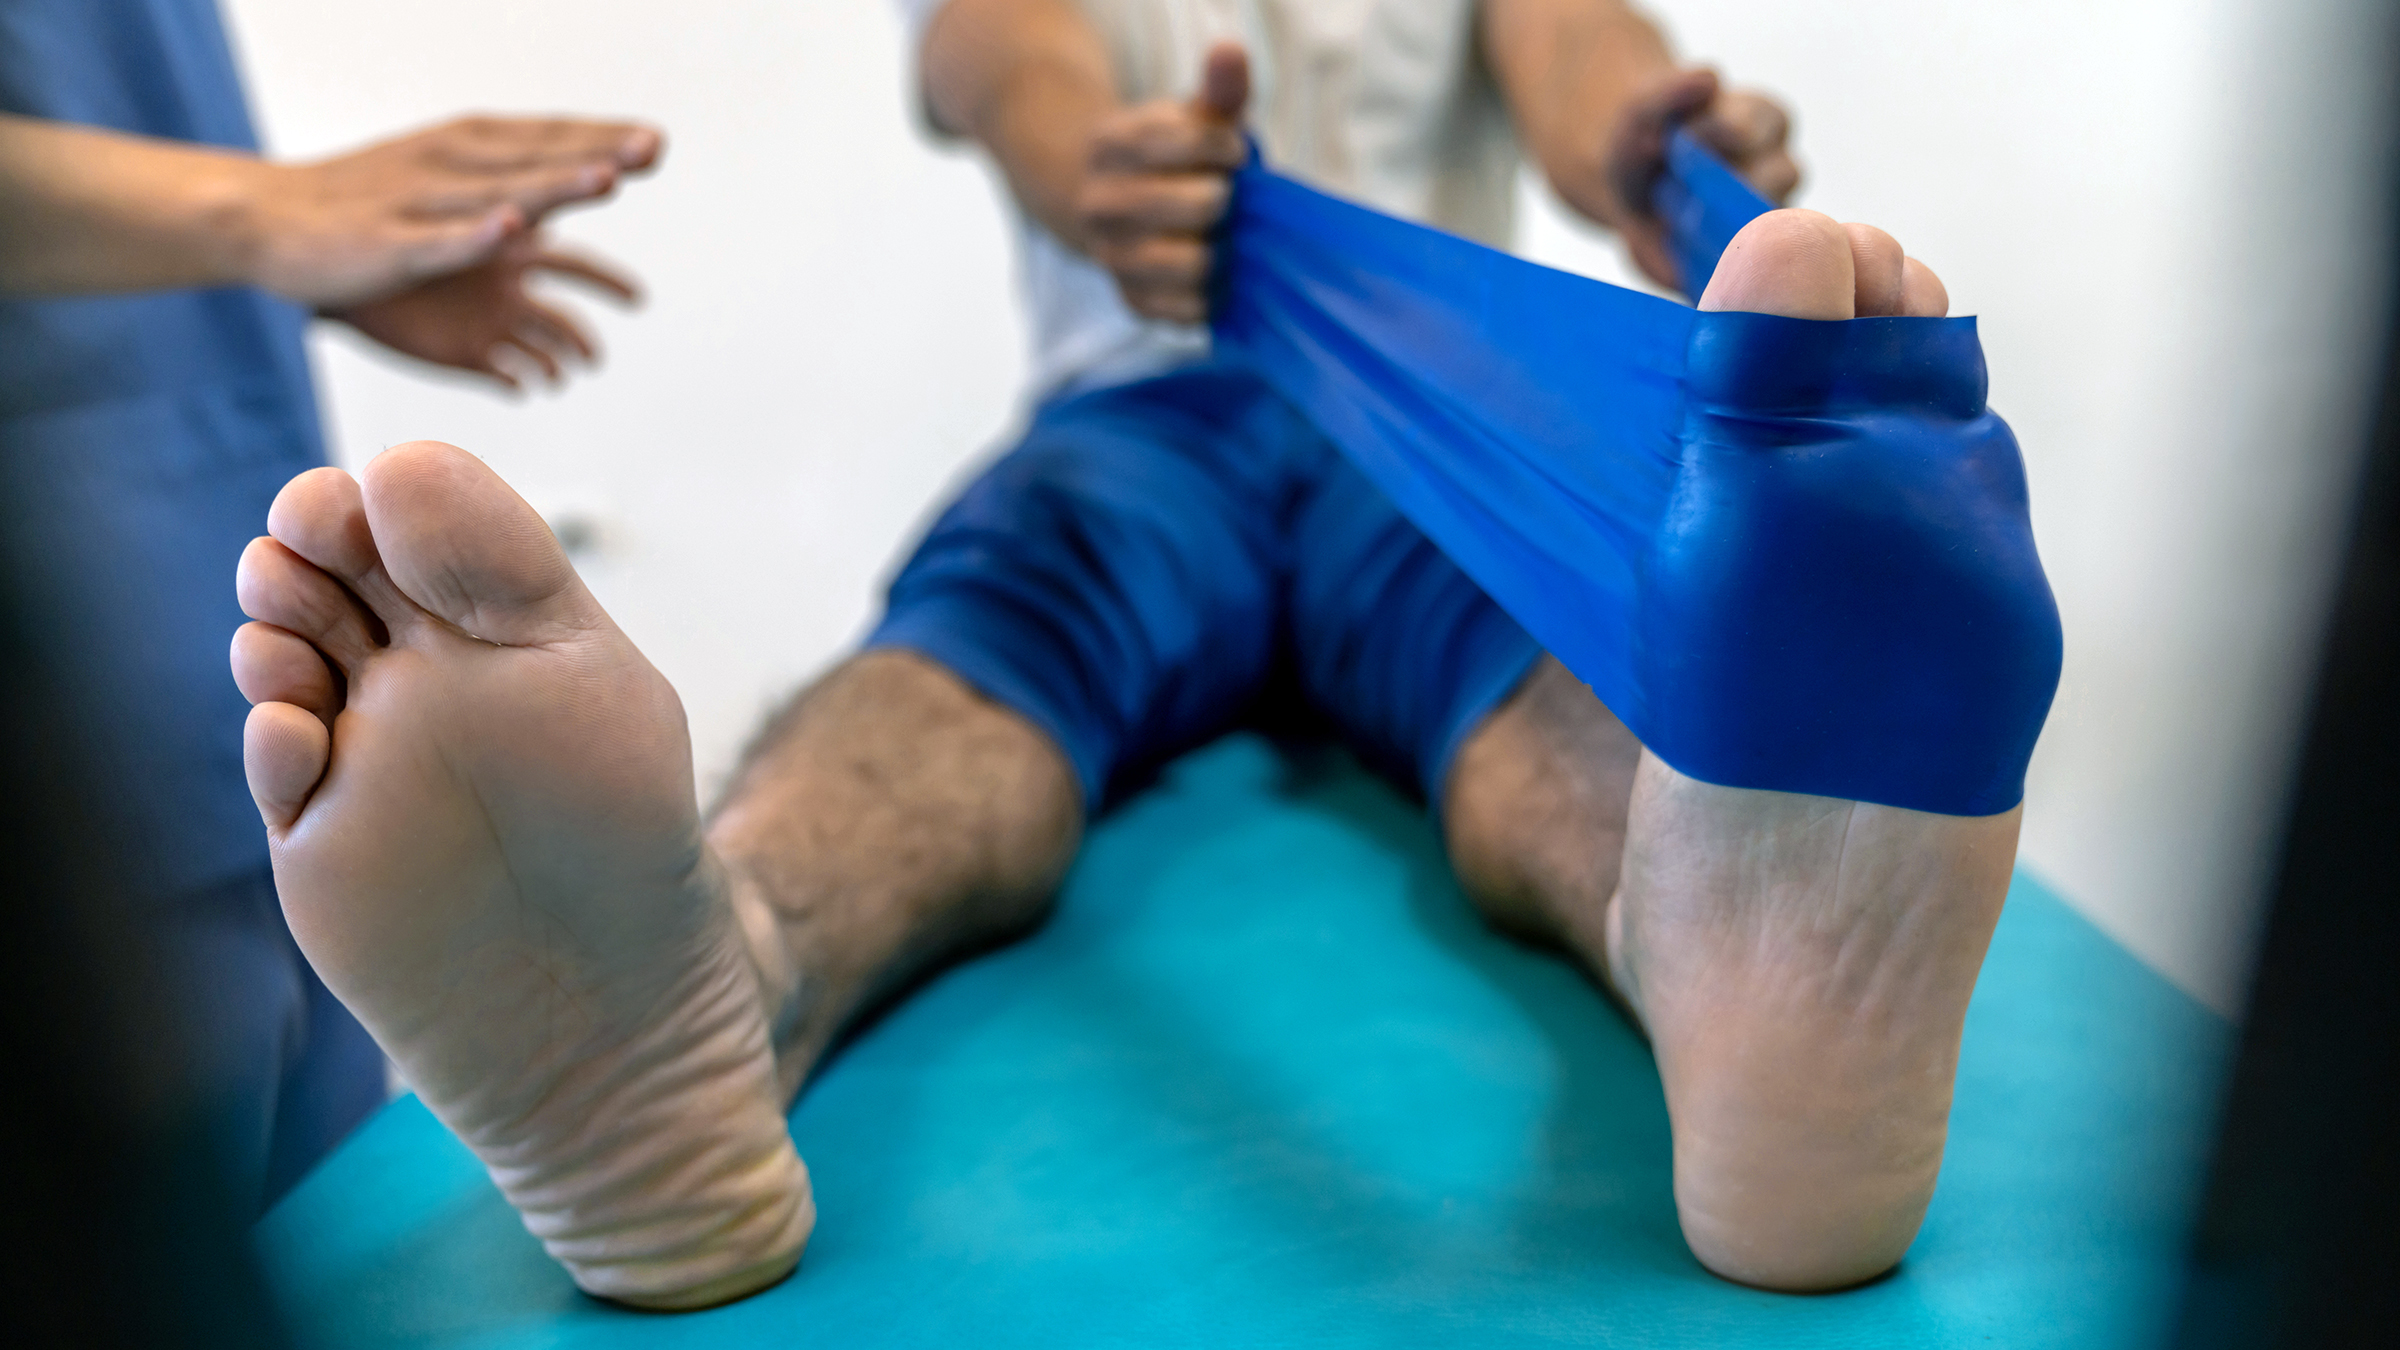 How to Rehab an Ankle Injury - Progressive PT